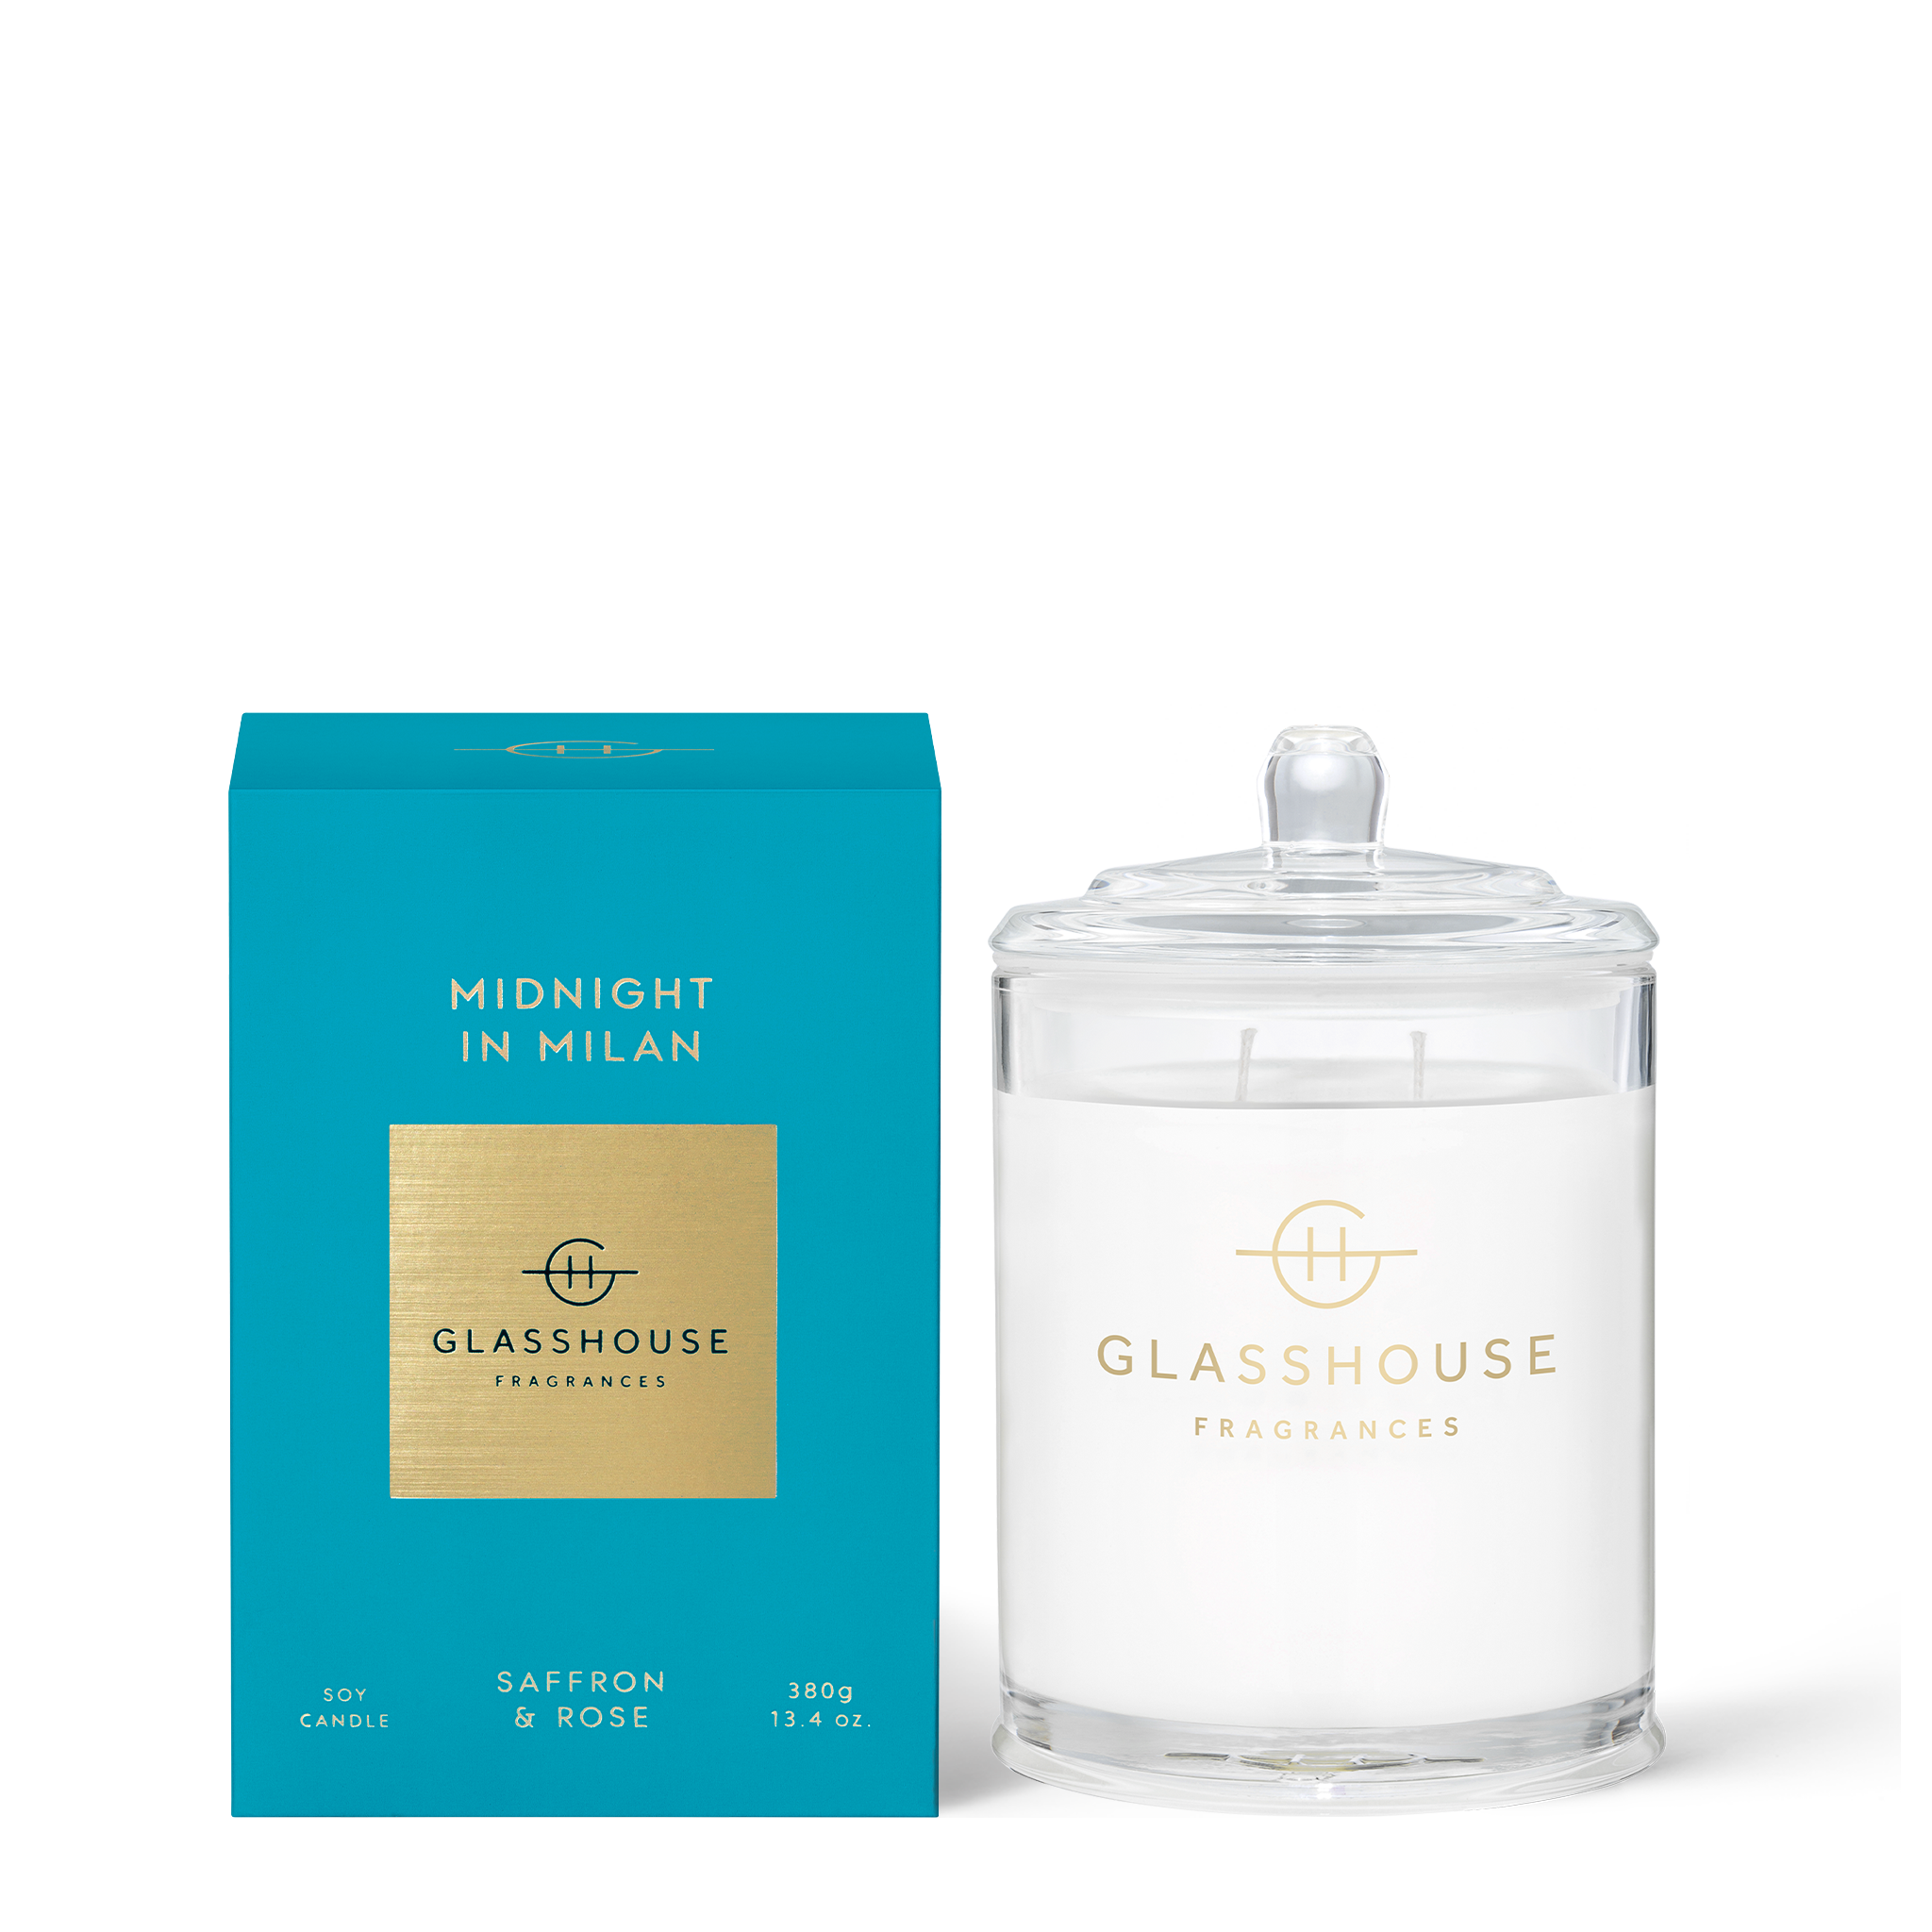 Glasshouse Midnight In Milan 380G Candle